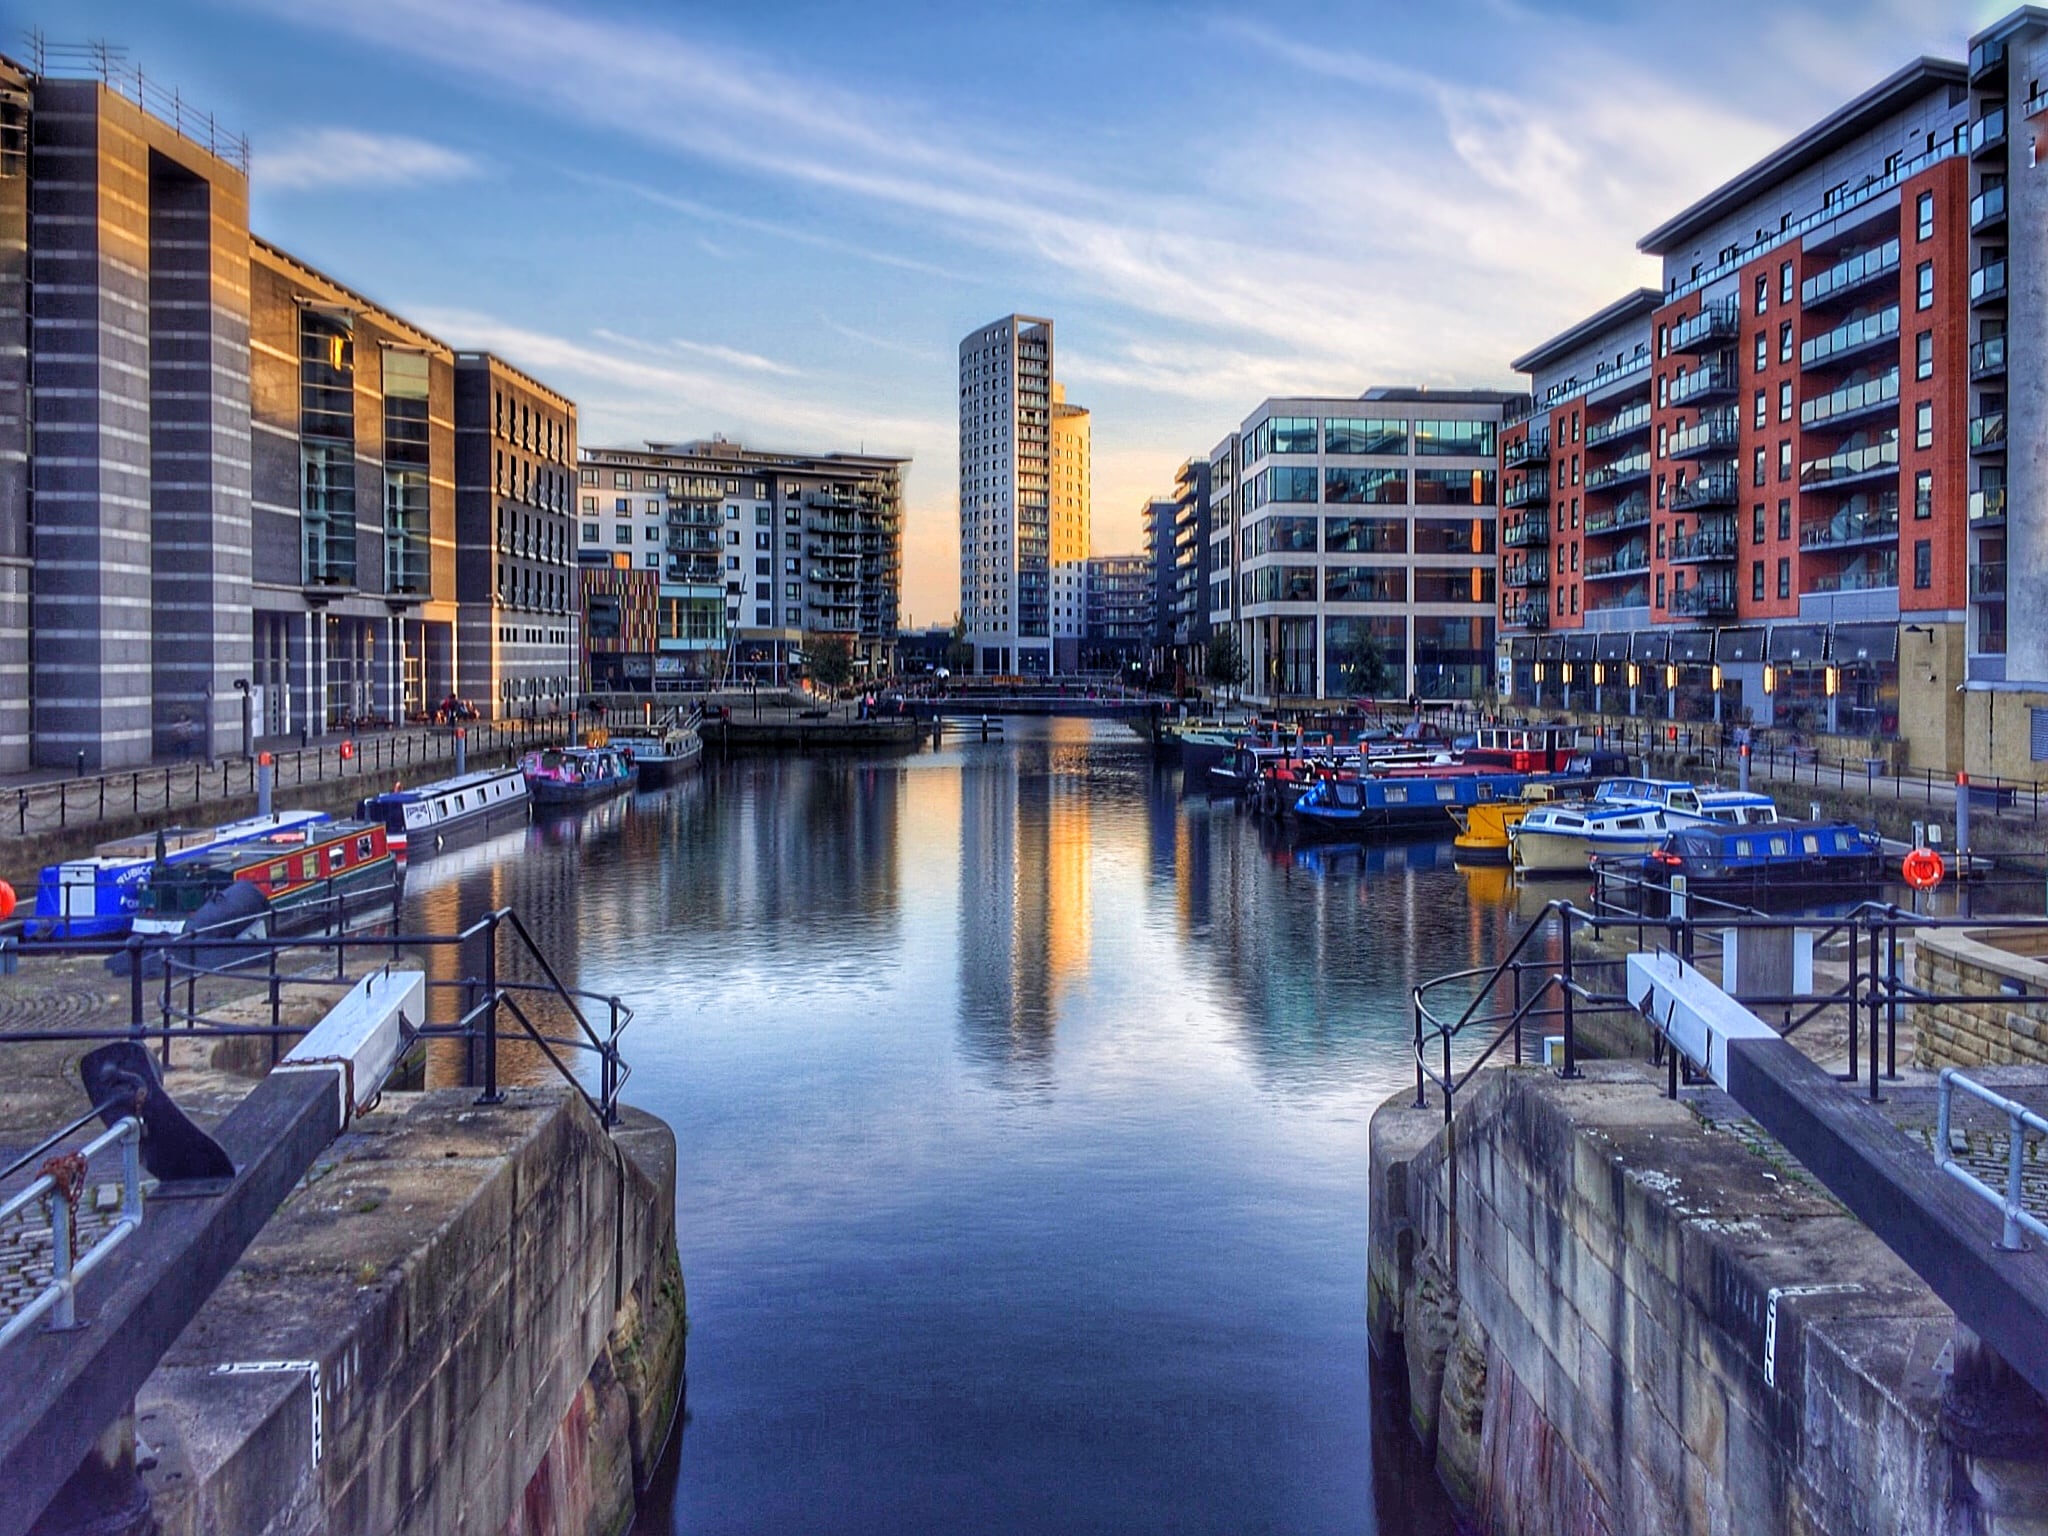 A view towards Leeds Dock with Bridgewater place in the background